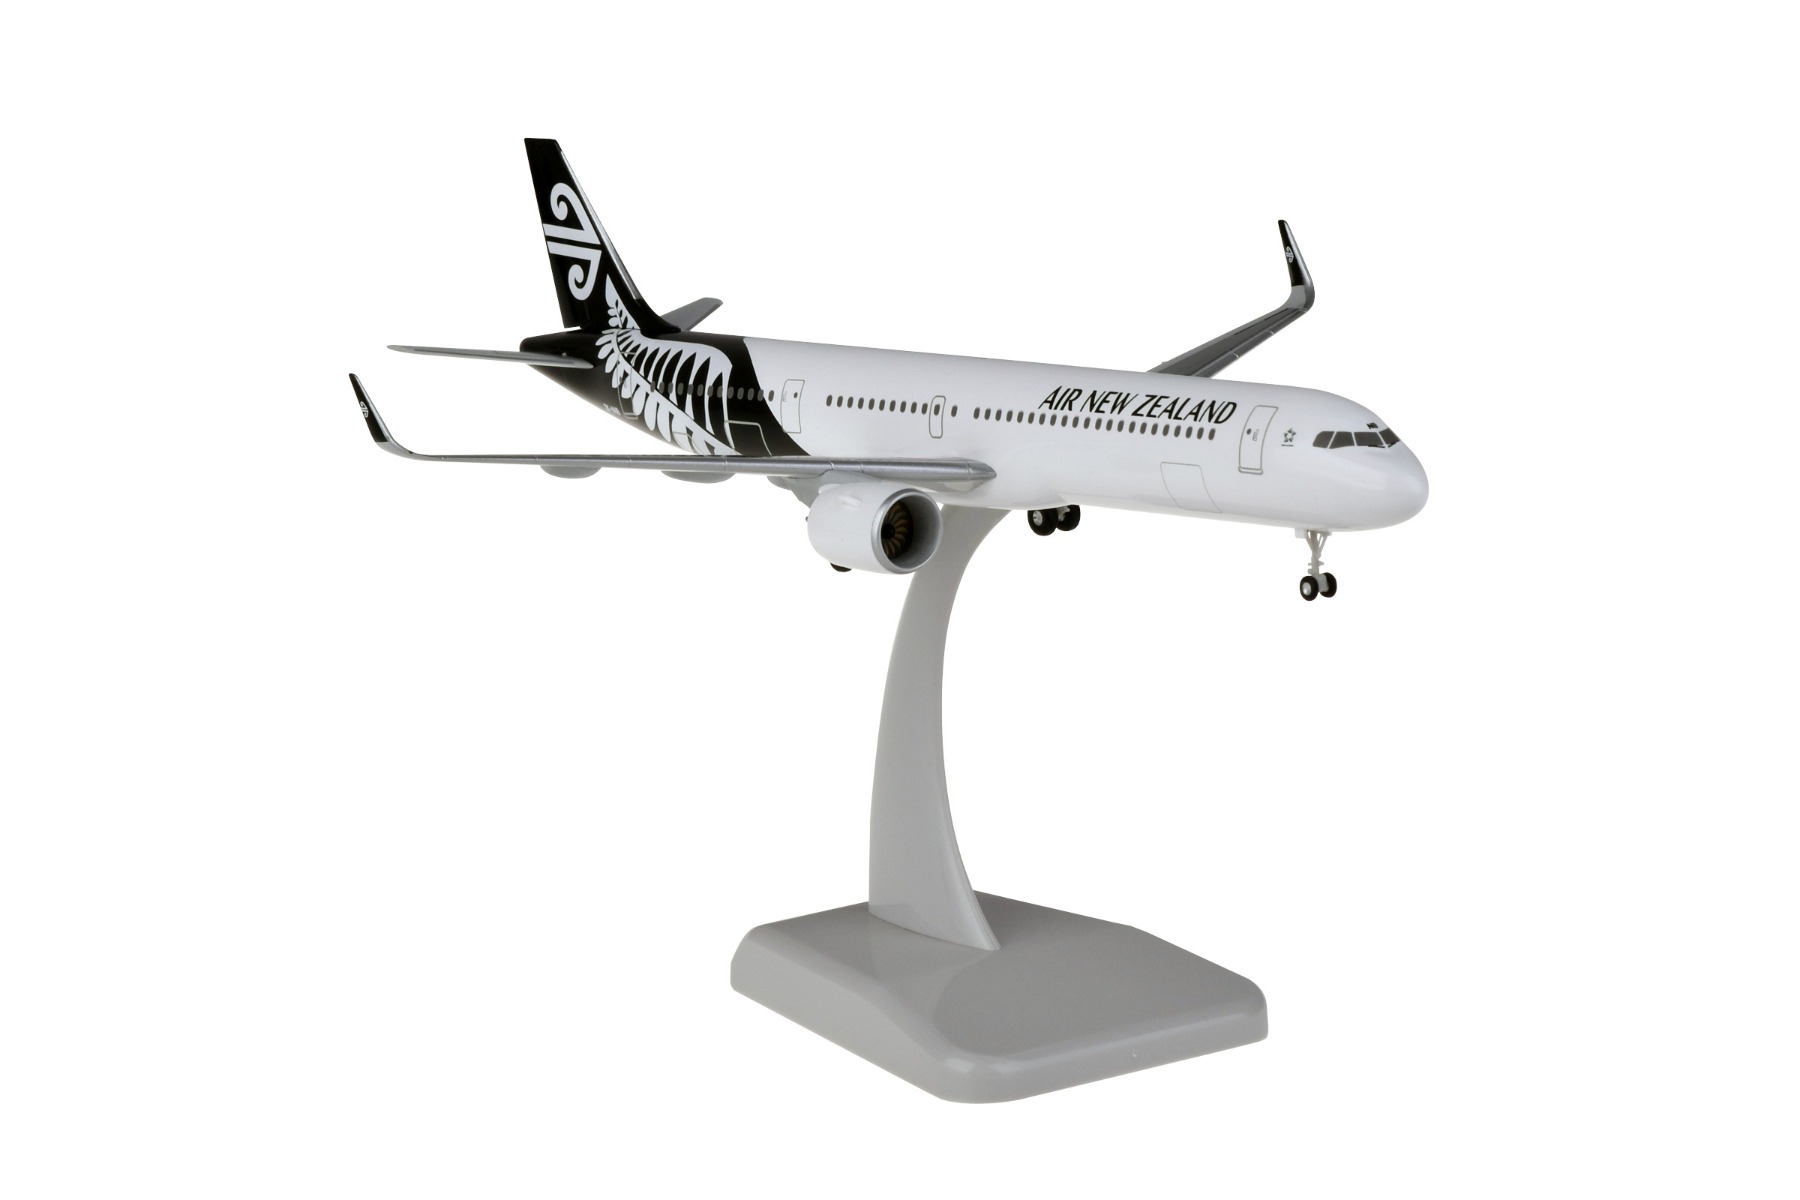 The company model airbus a321 neo scale 1:200 model airplane collection 